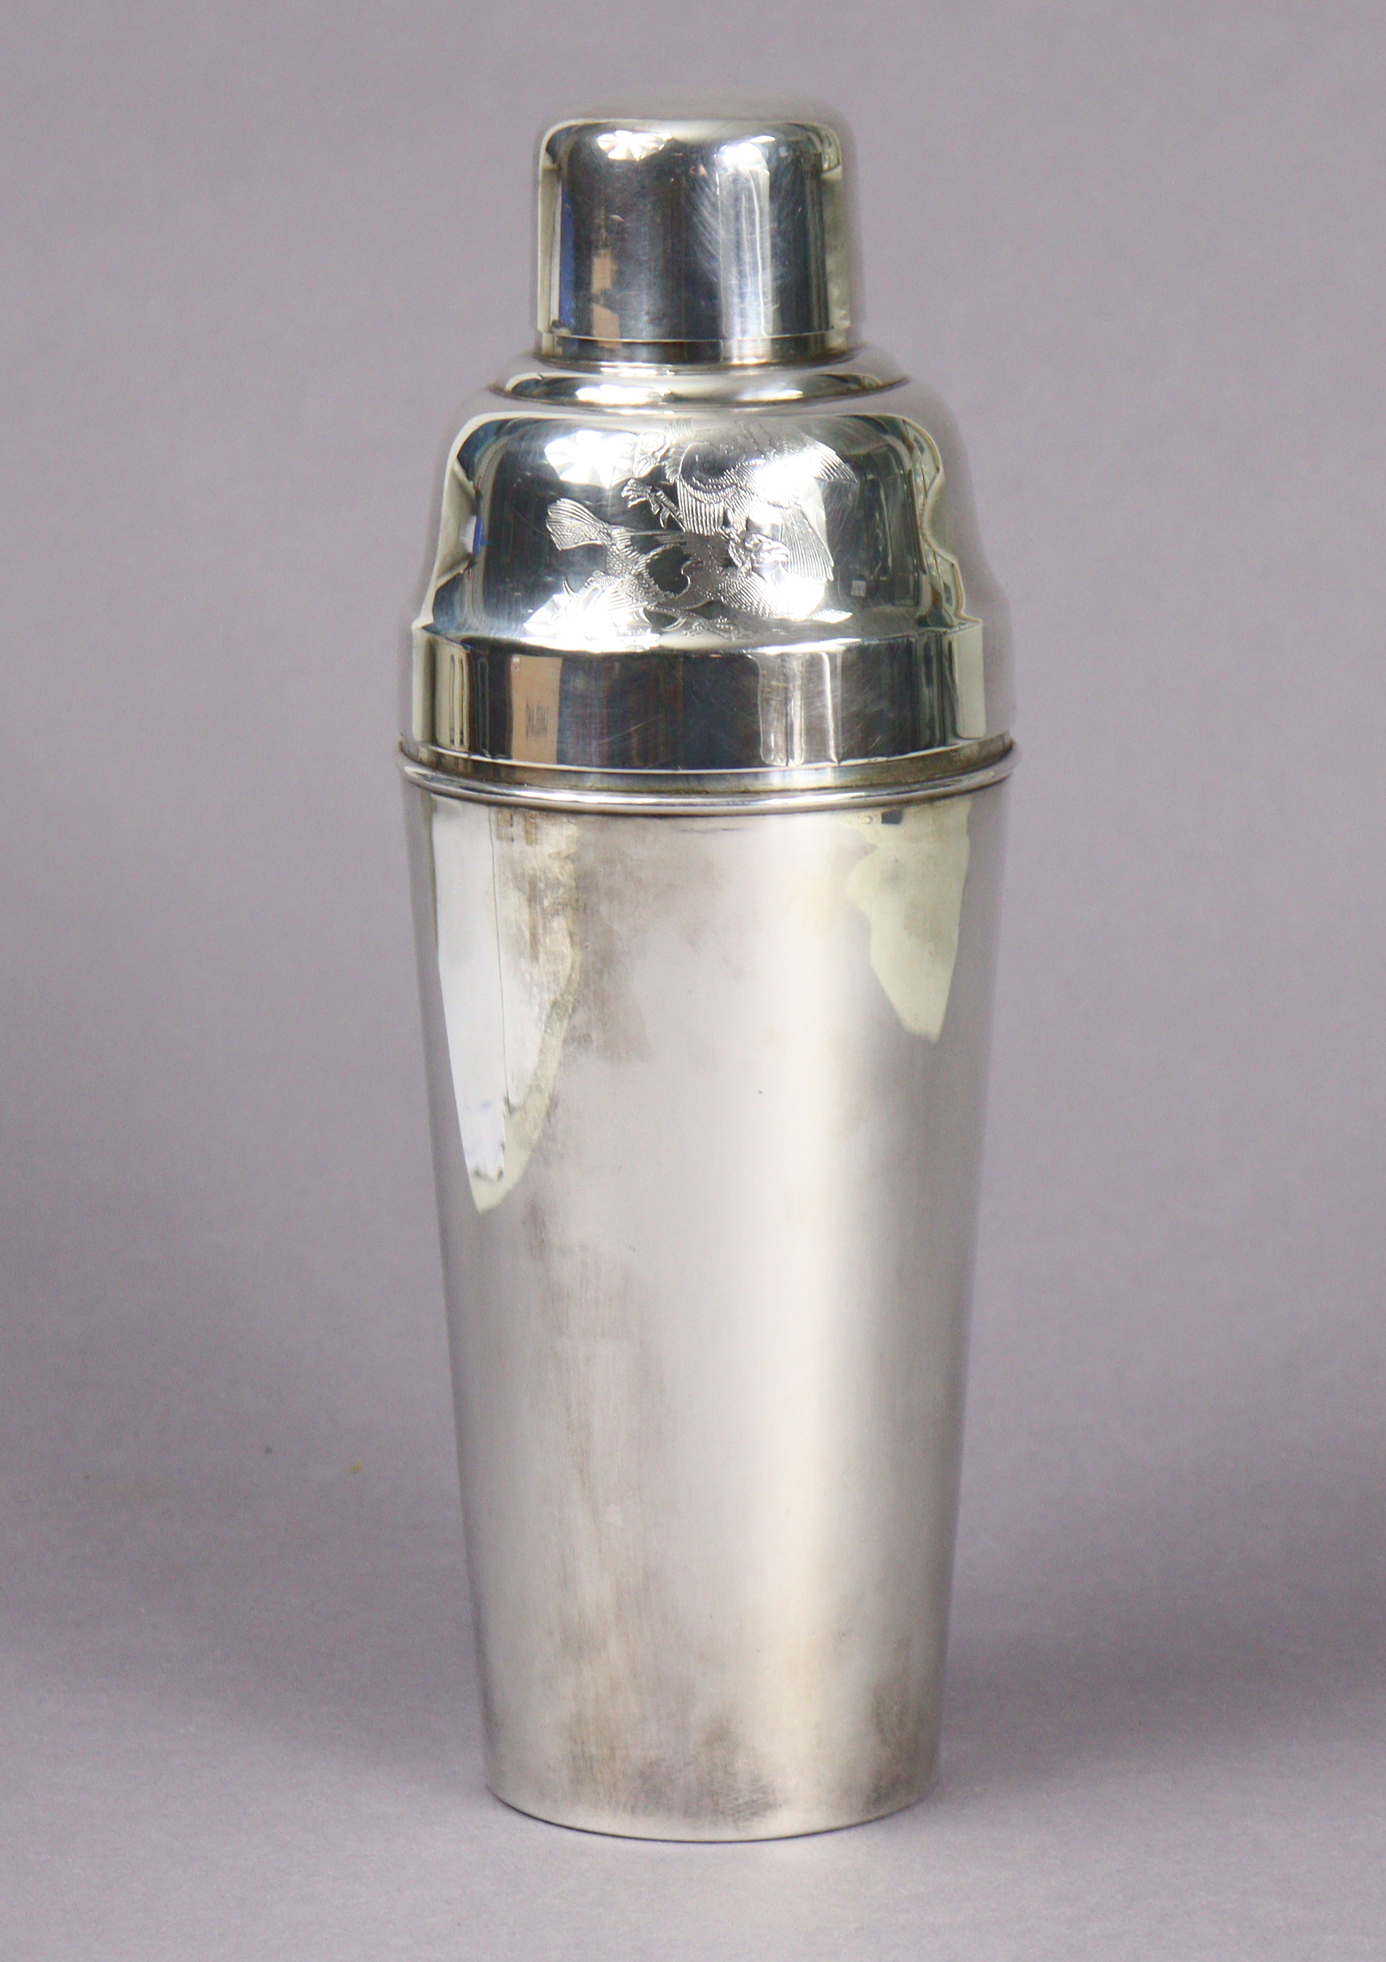 A 1930s Mappin & Webb “Prince’s Plate” cocktail shaker with engraved decoration, 24.5cm high.